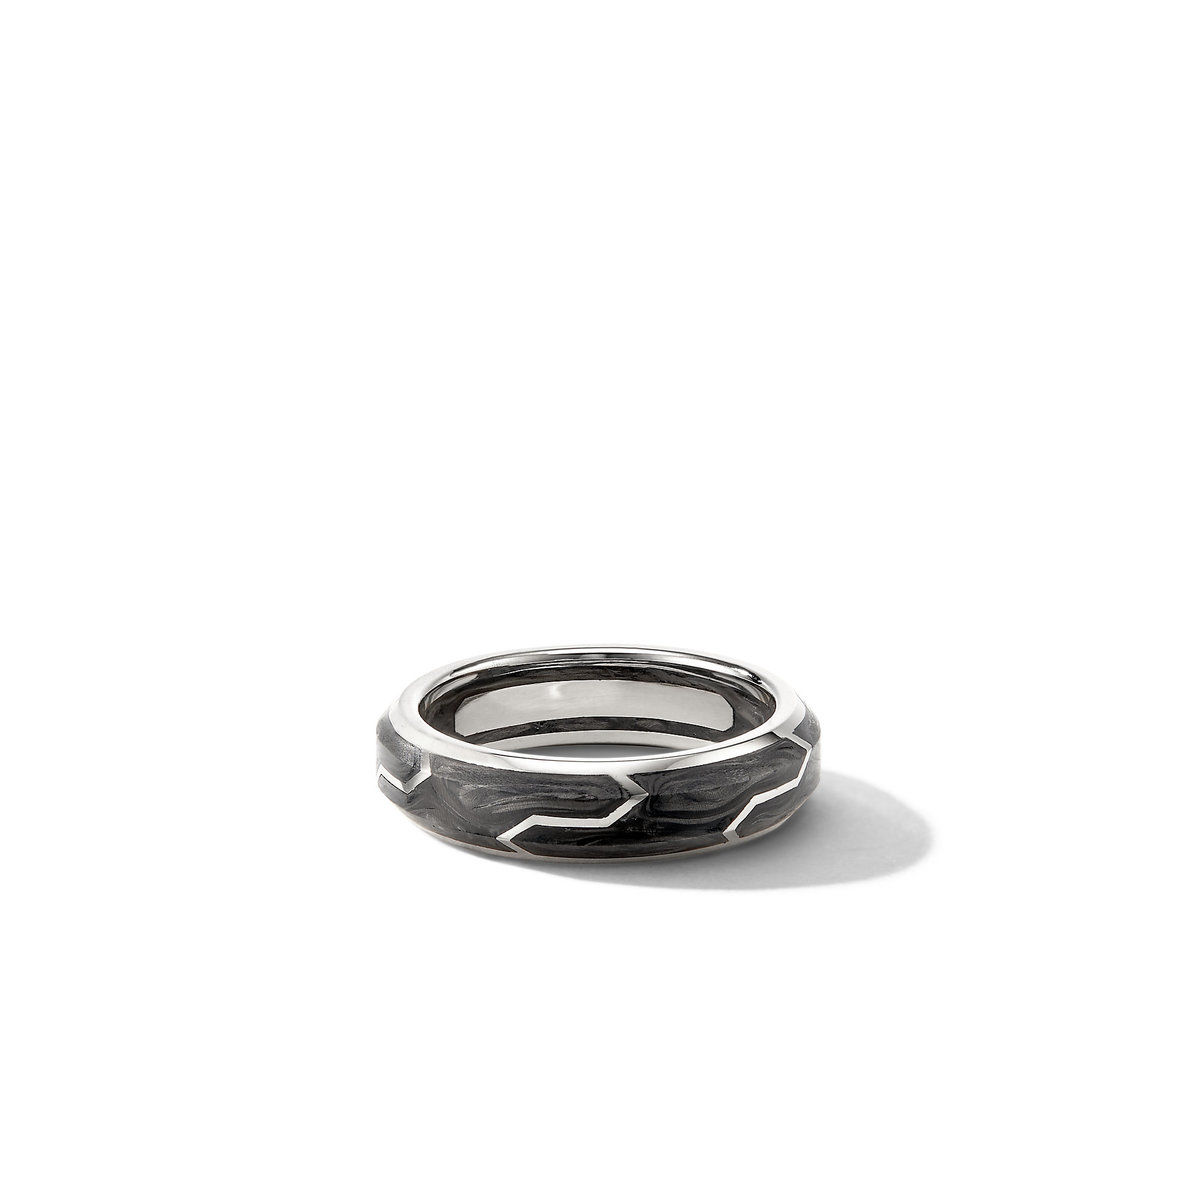 David Yurman Forged Carbon Band Ring with 18k White Gold | 6mm - Size 12.5